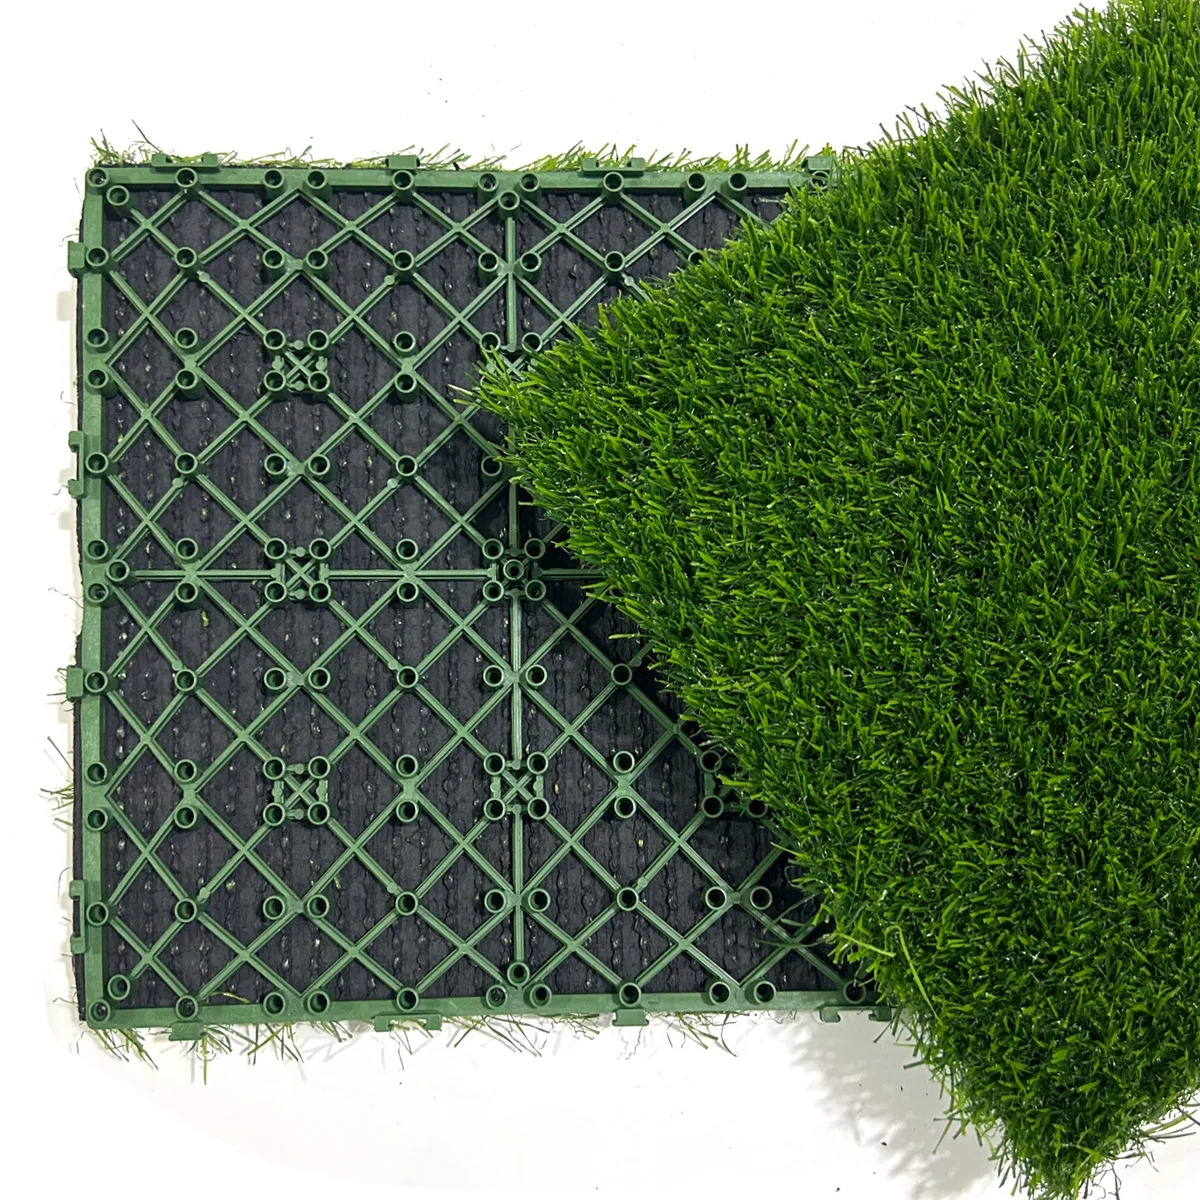 50st Floating Lawn Diy Moverble Free Splice, Paving the Ground Simulation Artificial Turf